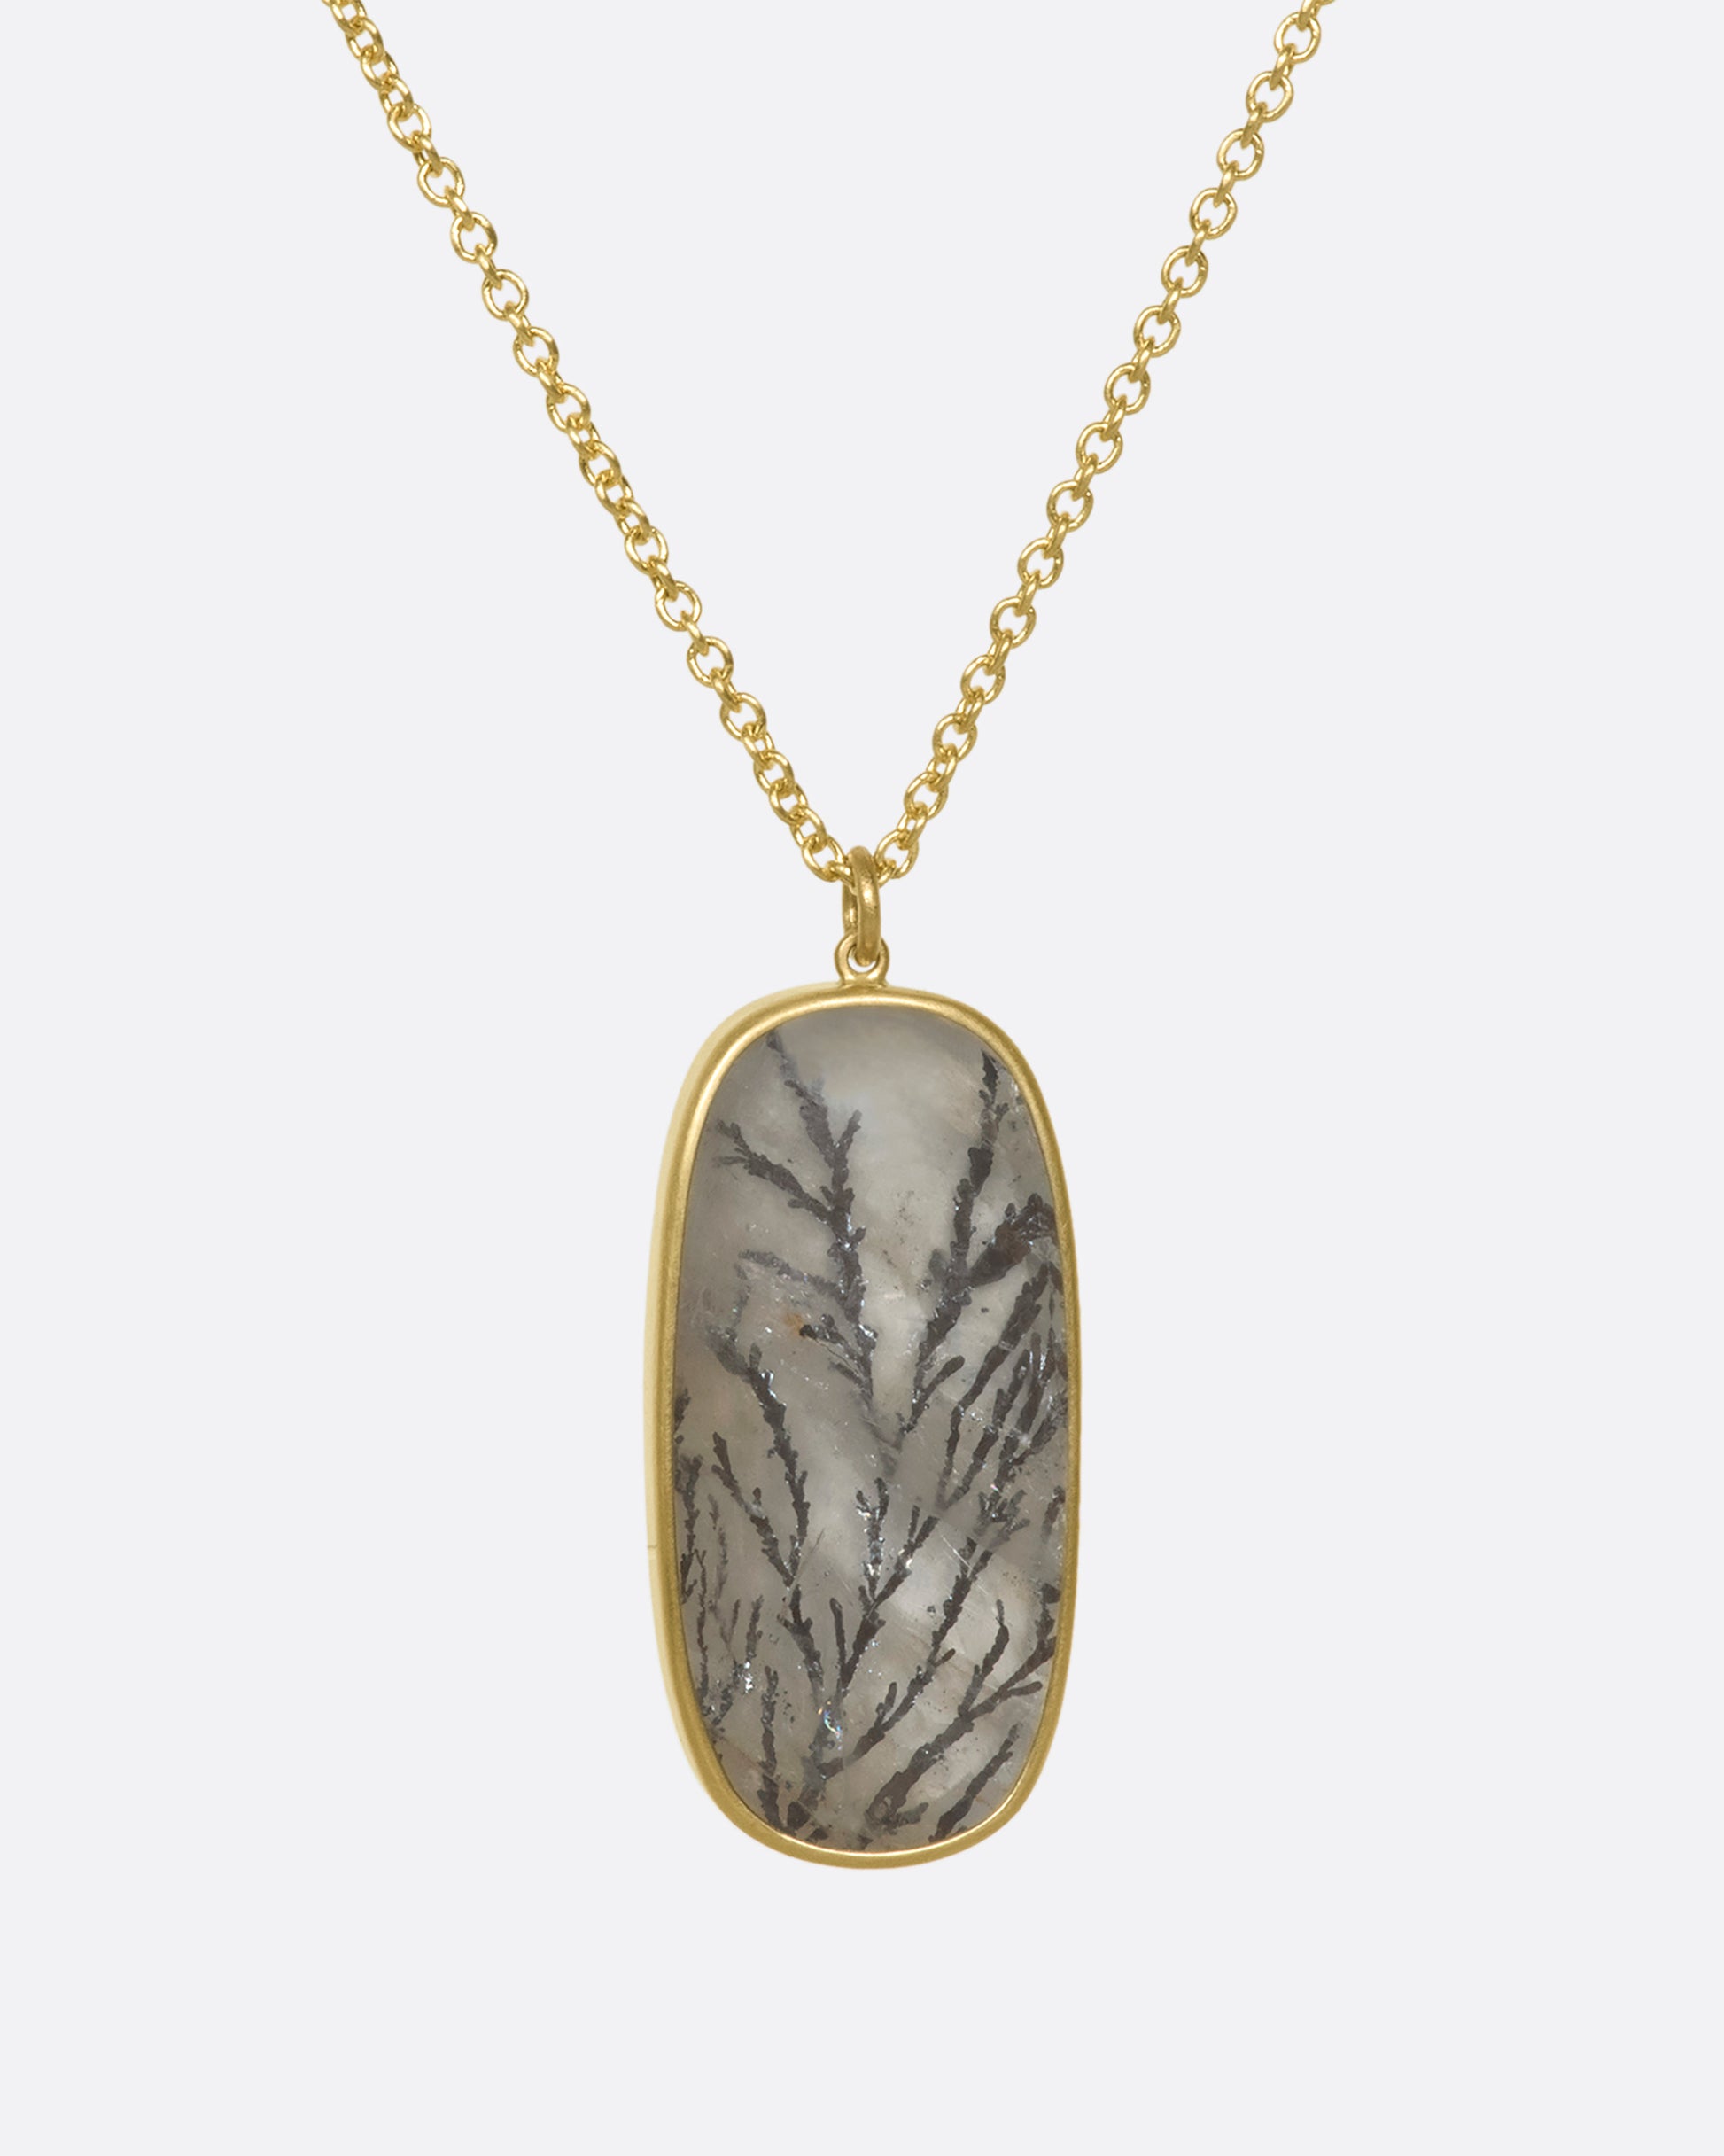 A hanging dendritic quartz pendant on a yellow gold chain.